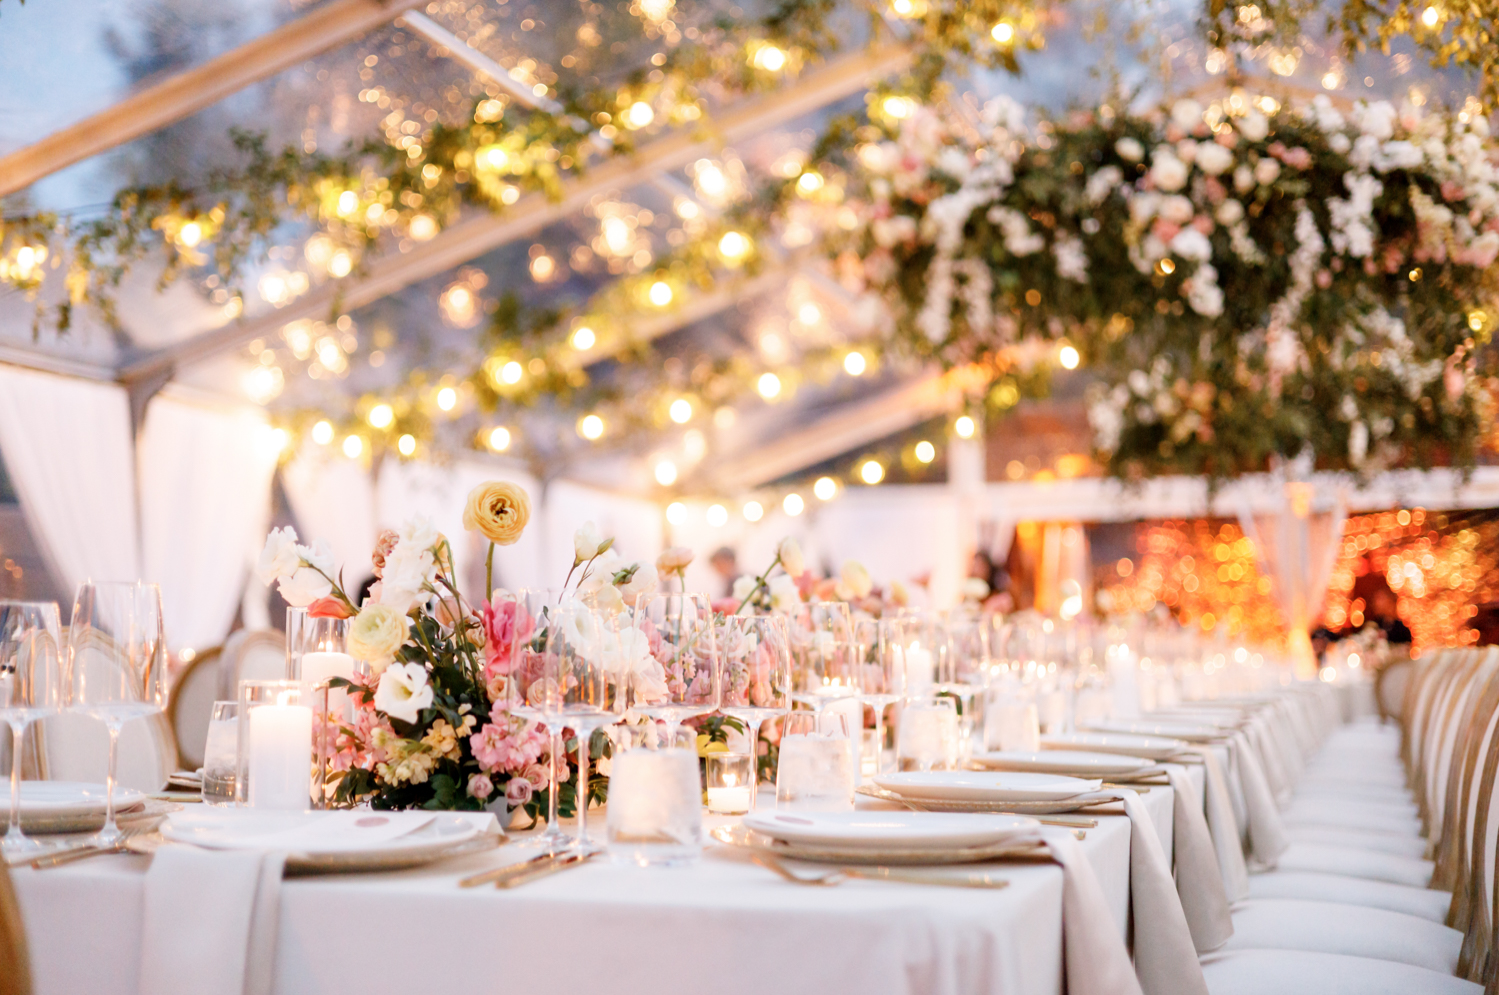 pastel florals line the table at the reception as lights twinkle overhead 